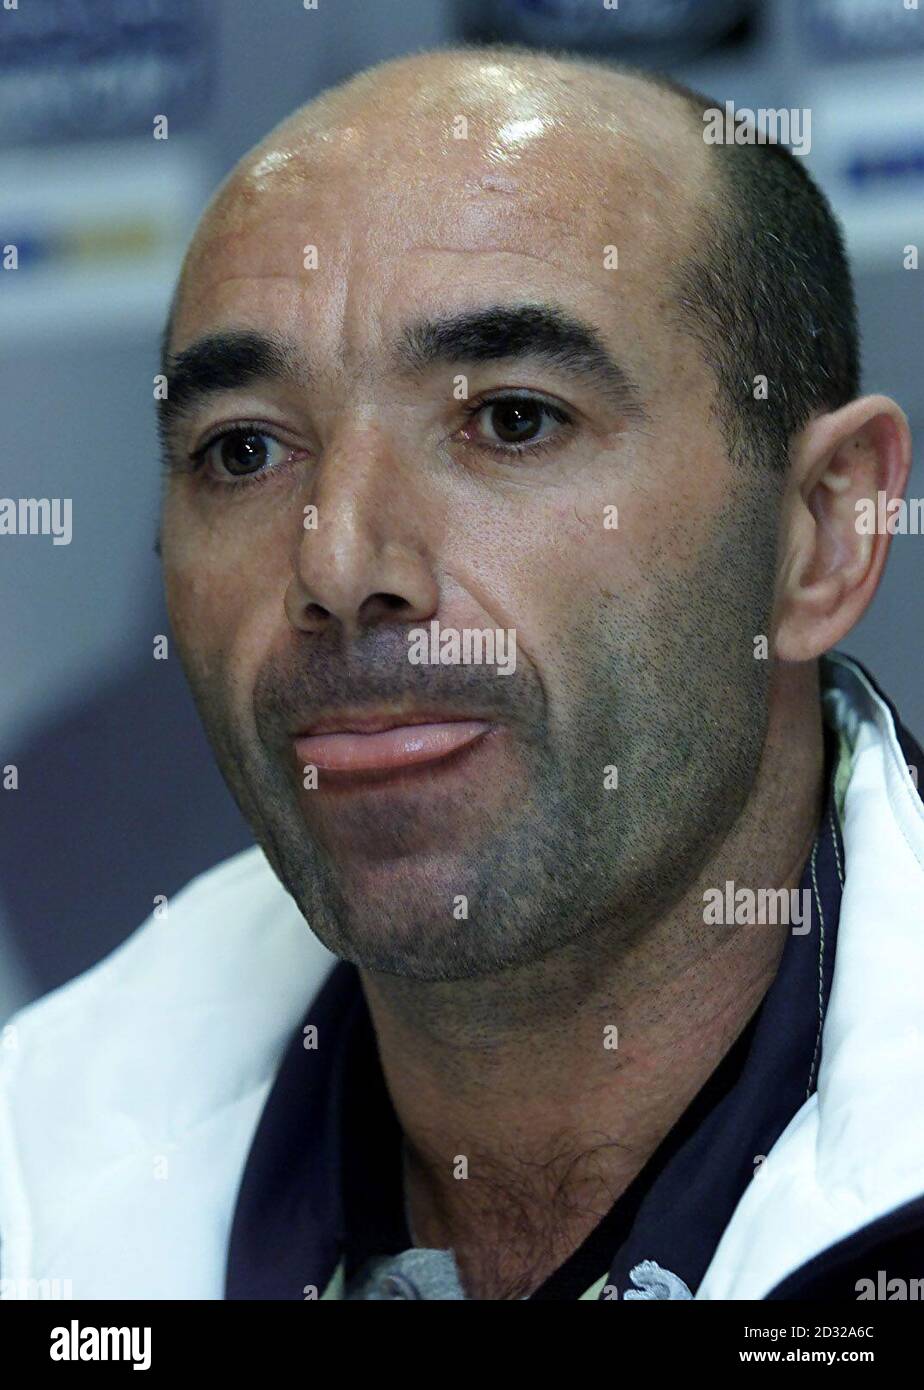 Boavista coach Jaime Pacheco speaking at a press conference before the 2nd phase, group 2, Champions League match against Man Utd at Old Trafford. Stock Photo